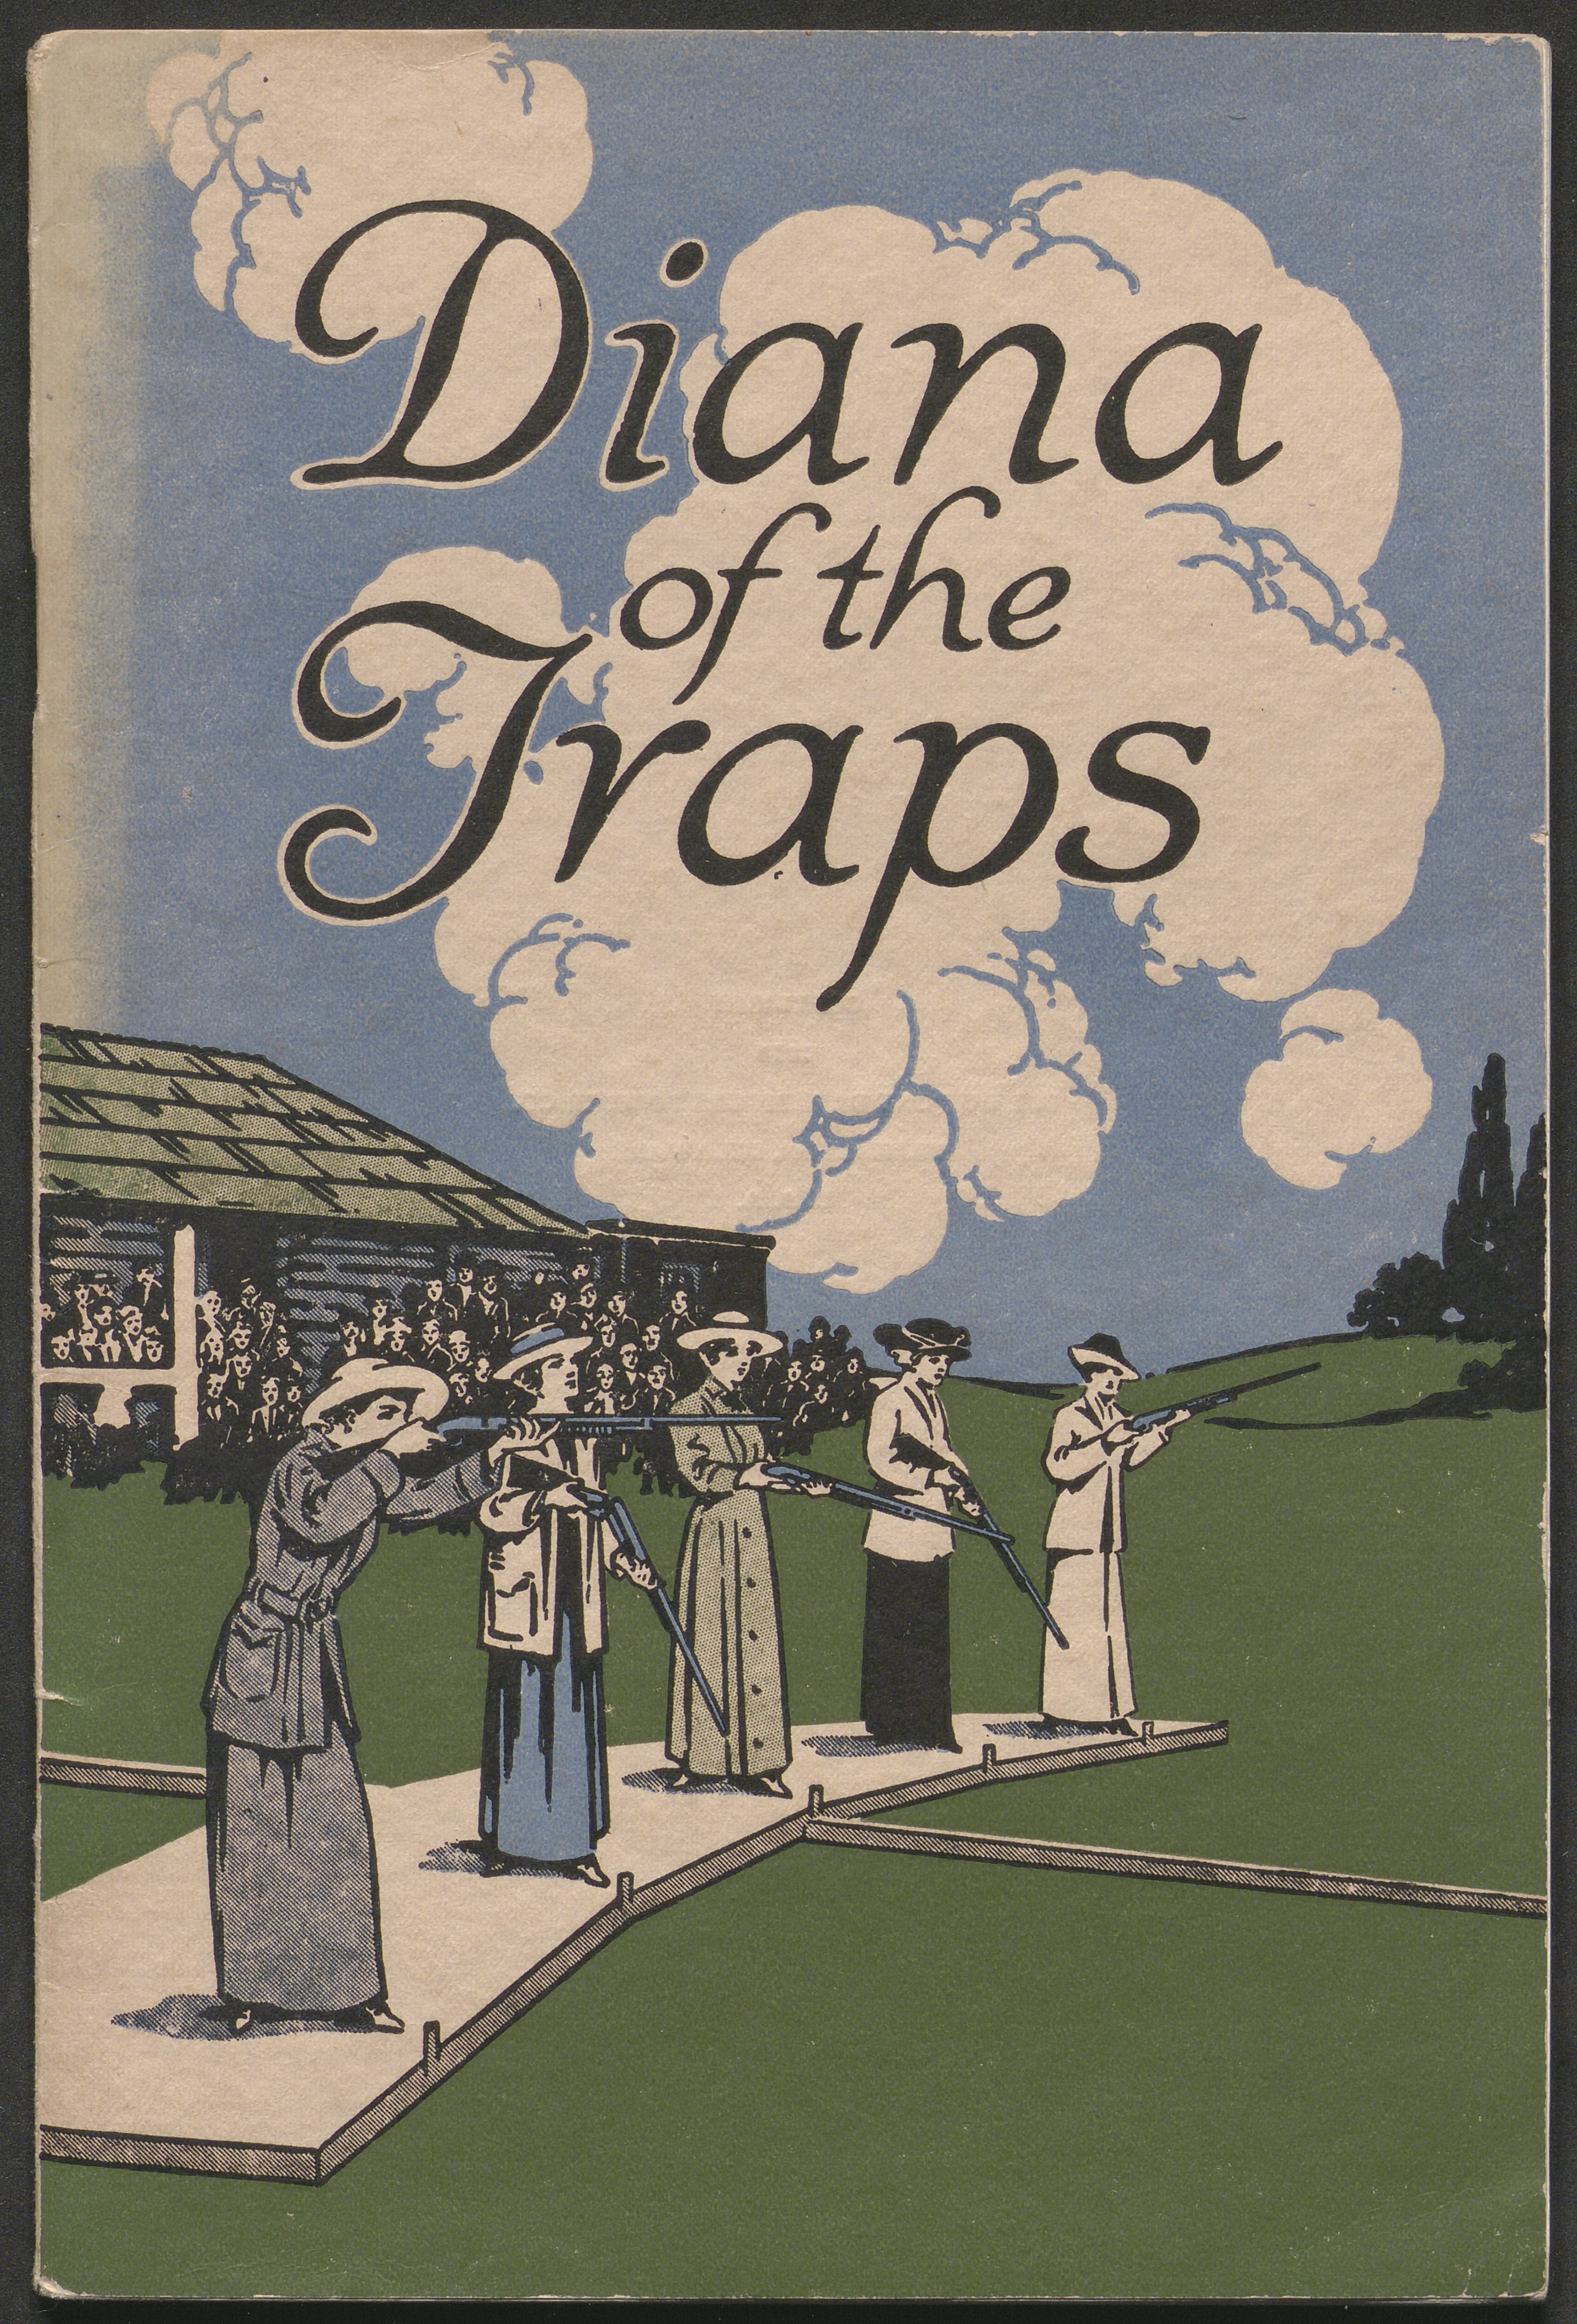 Cover to the pamphlet "Diana of the Traps" showing an illustration of women trapshooters.